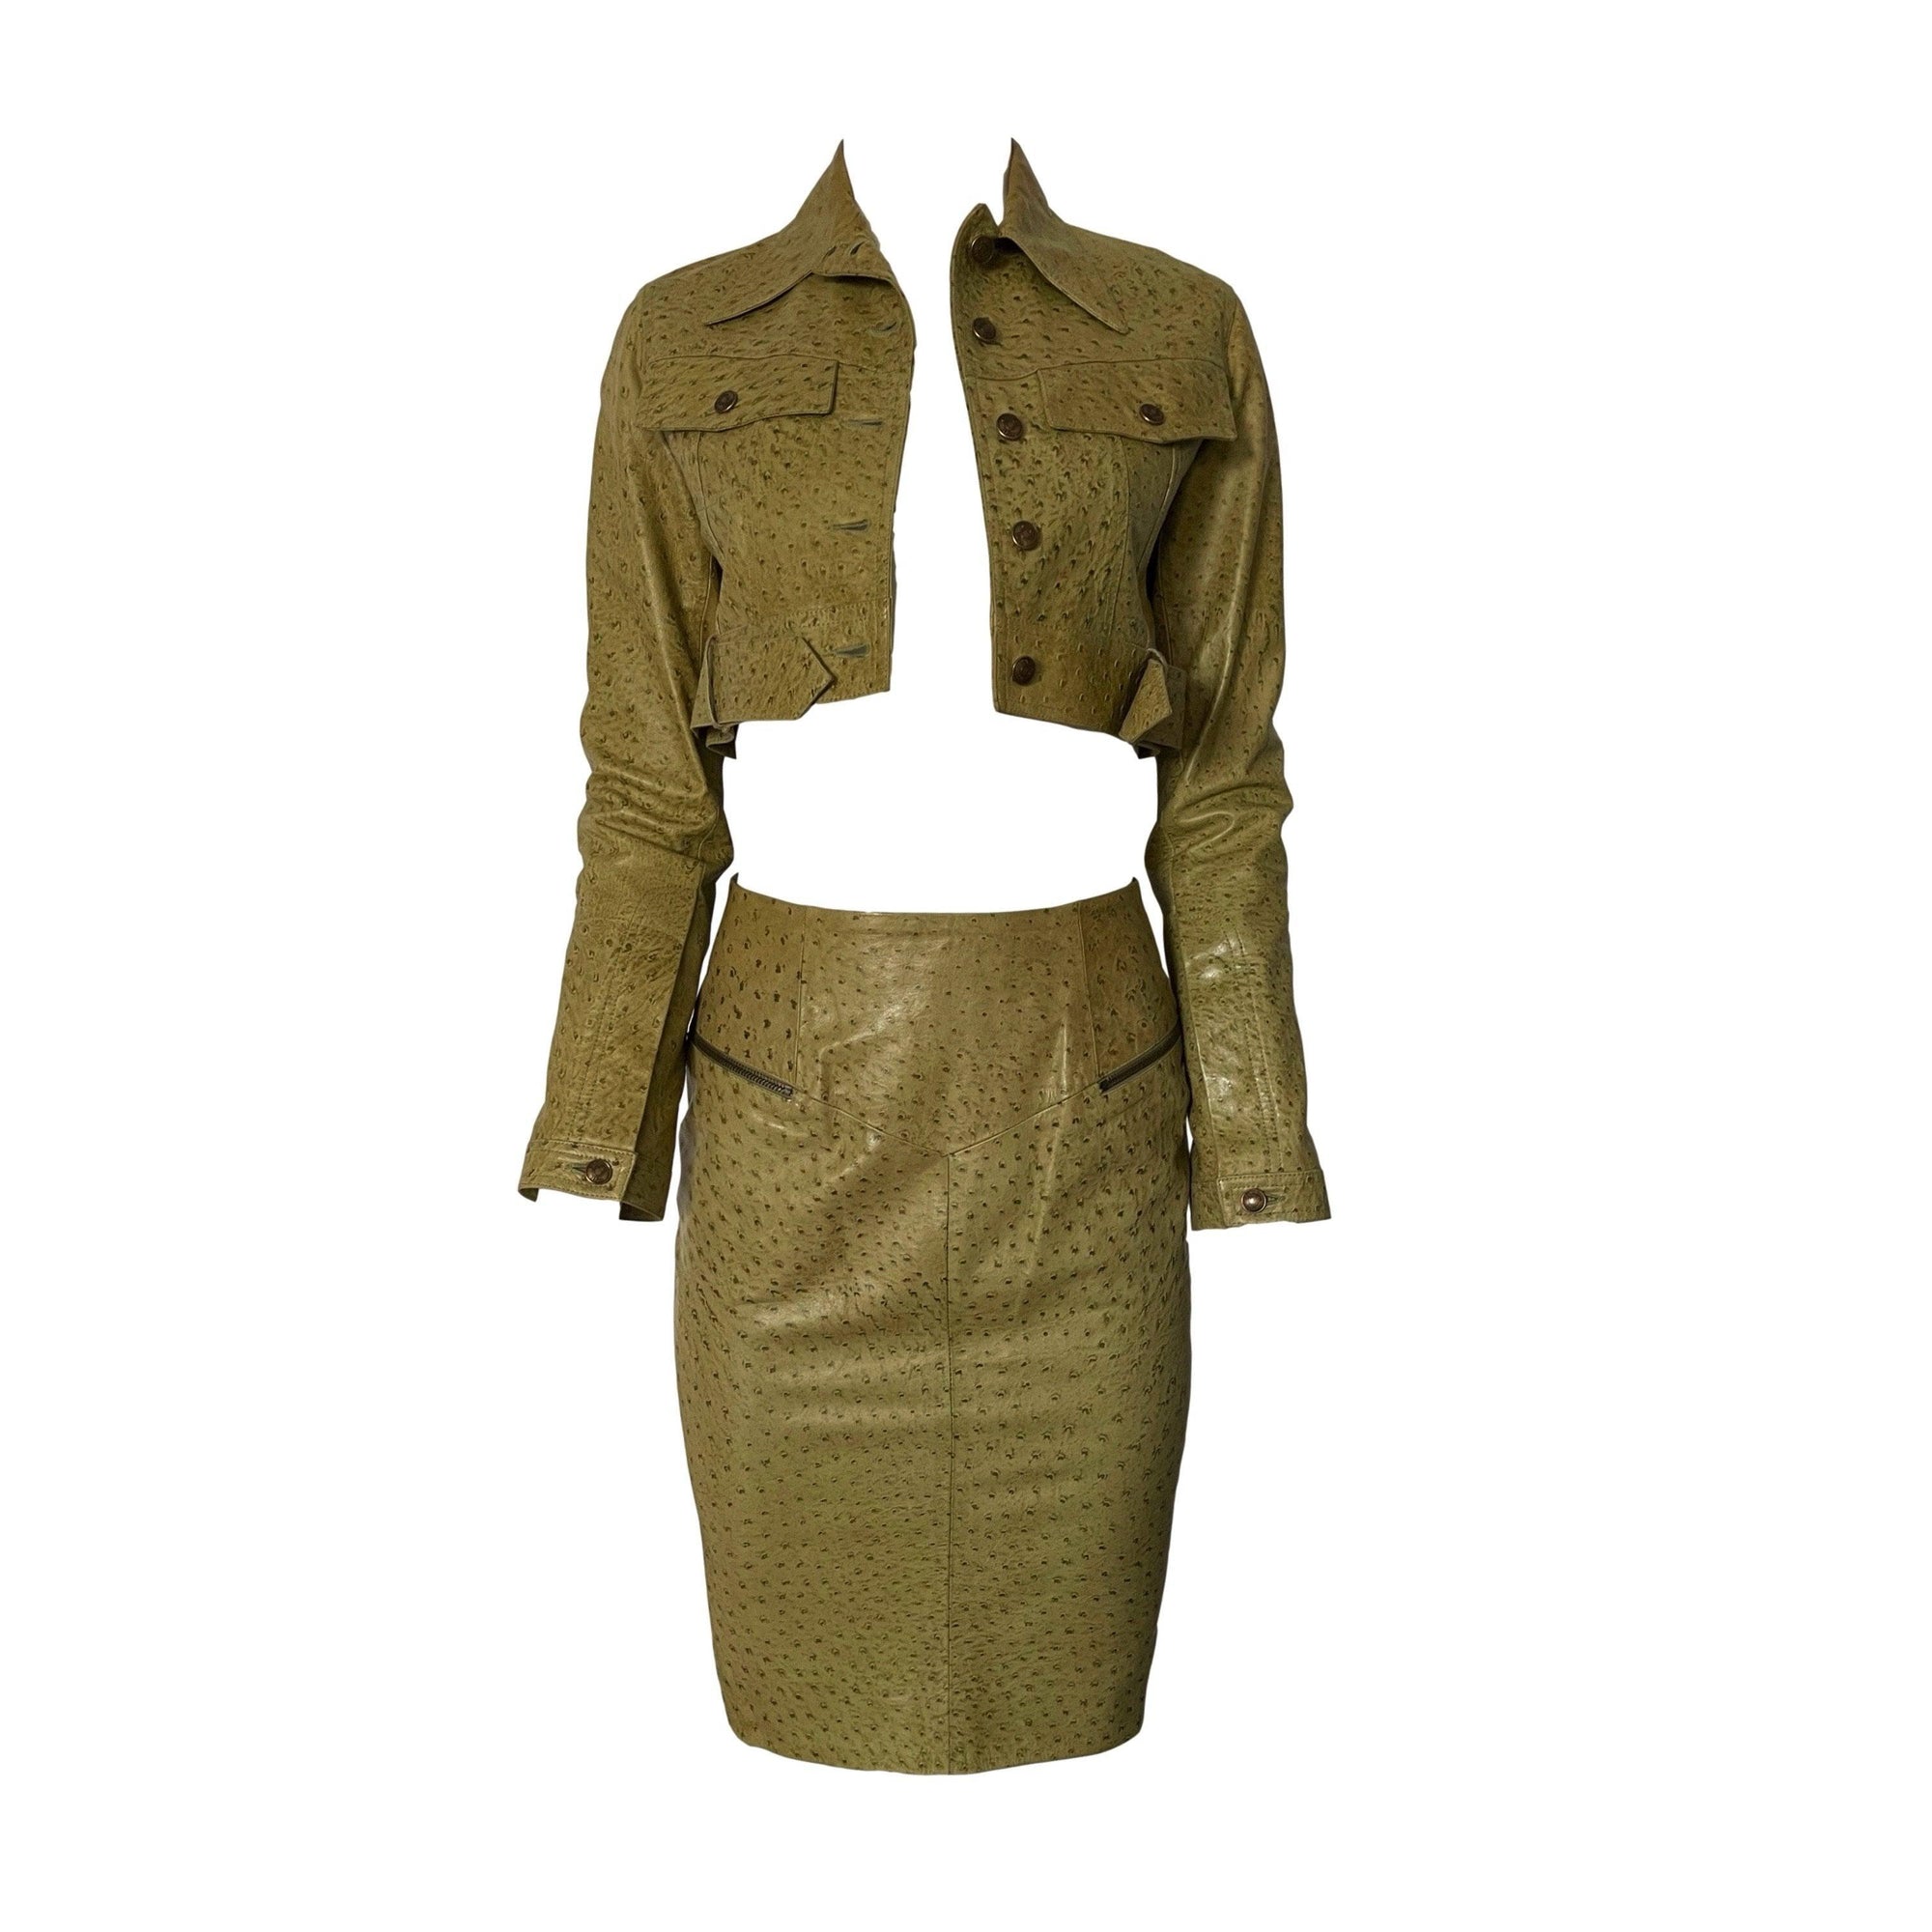 Dior Green Leather Cropped Skirt Set - Apparel